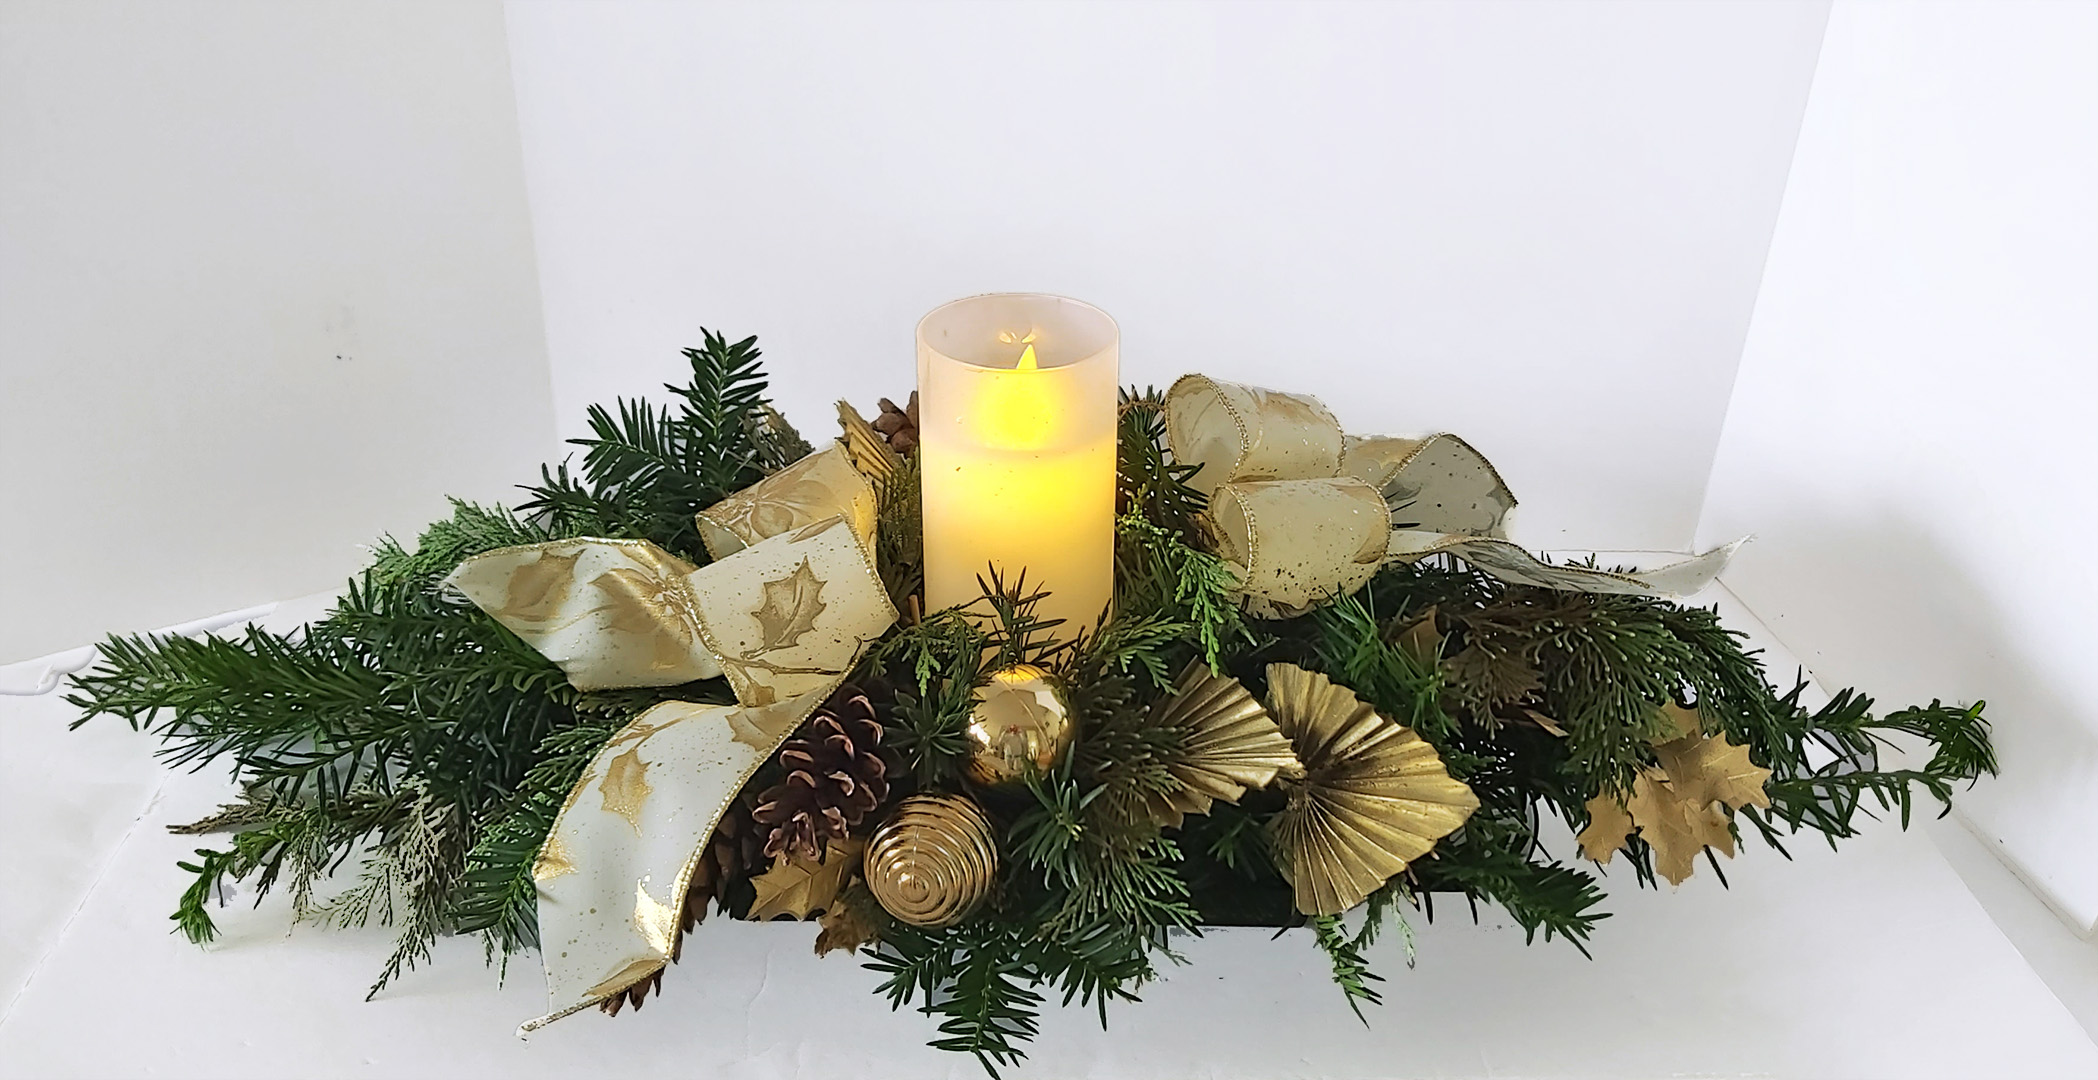 Evergreen table centrepiece featuring an everlasting candle nestled among the fresh scent of evergreens, complimented with classic gold accents, pinecones and finished with the delicate sparkle of ribbon